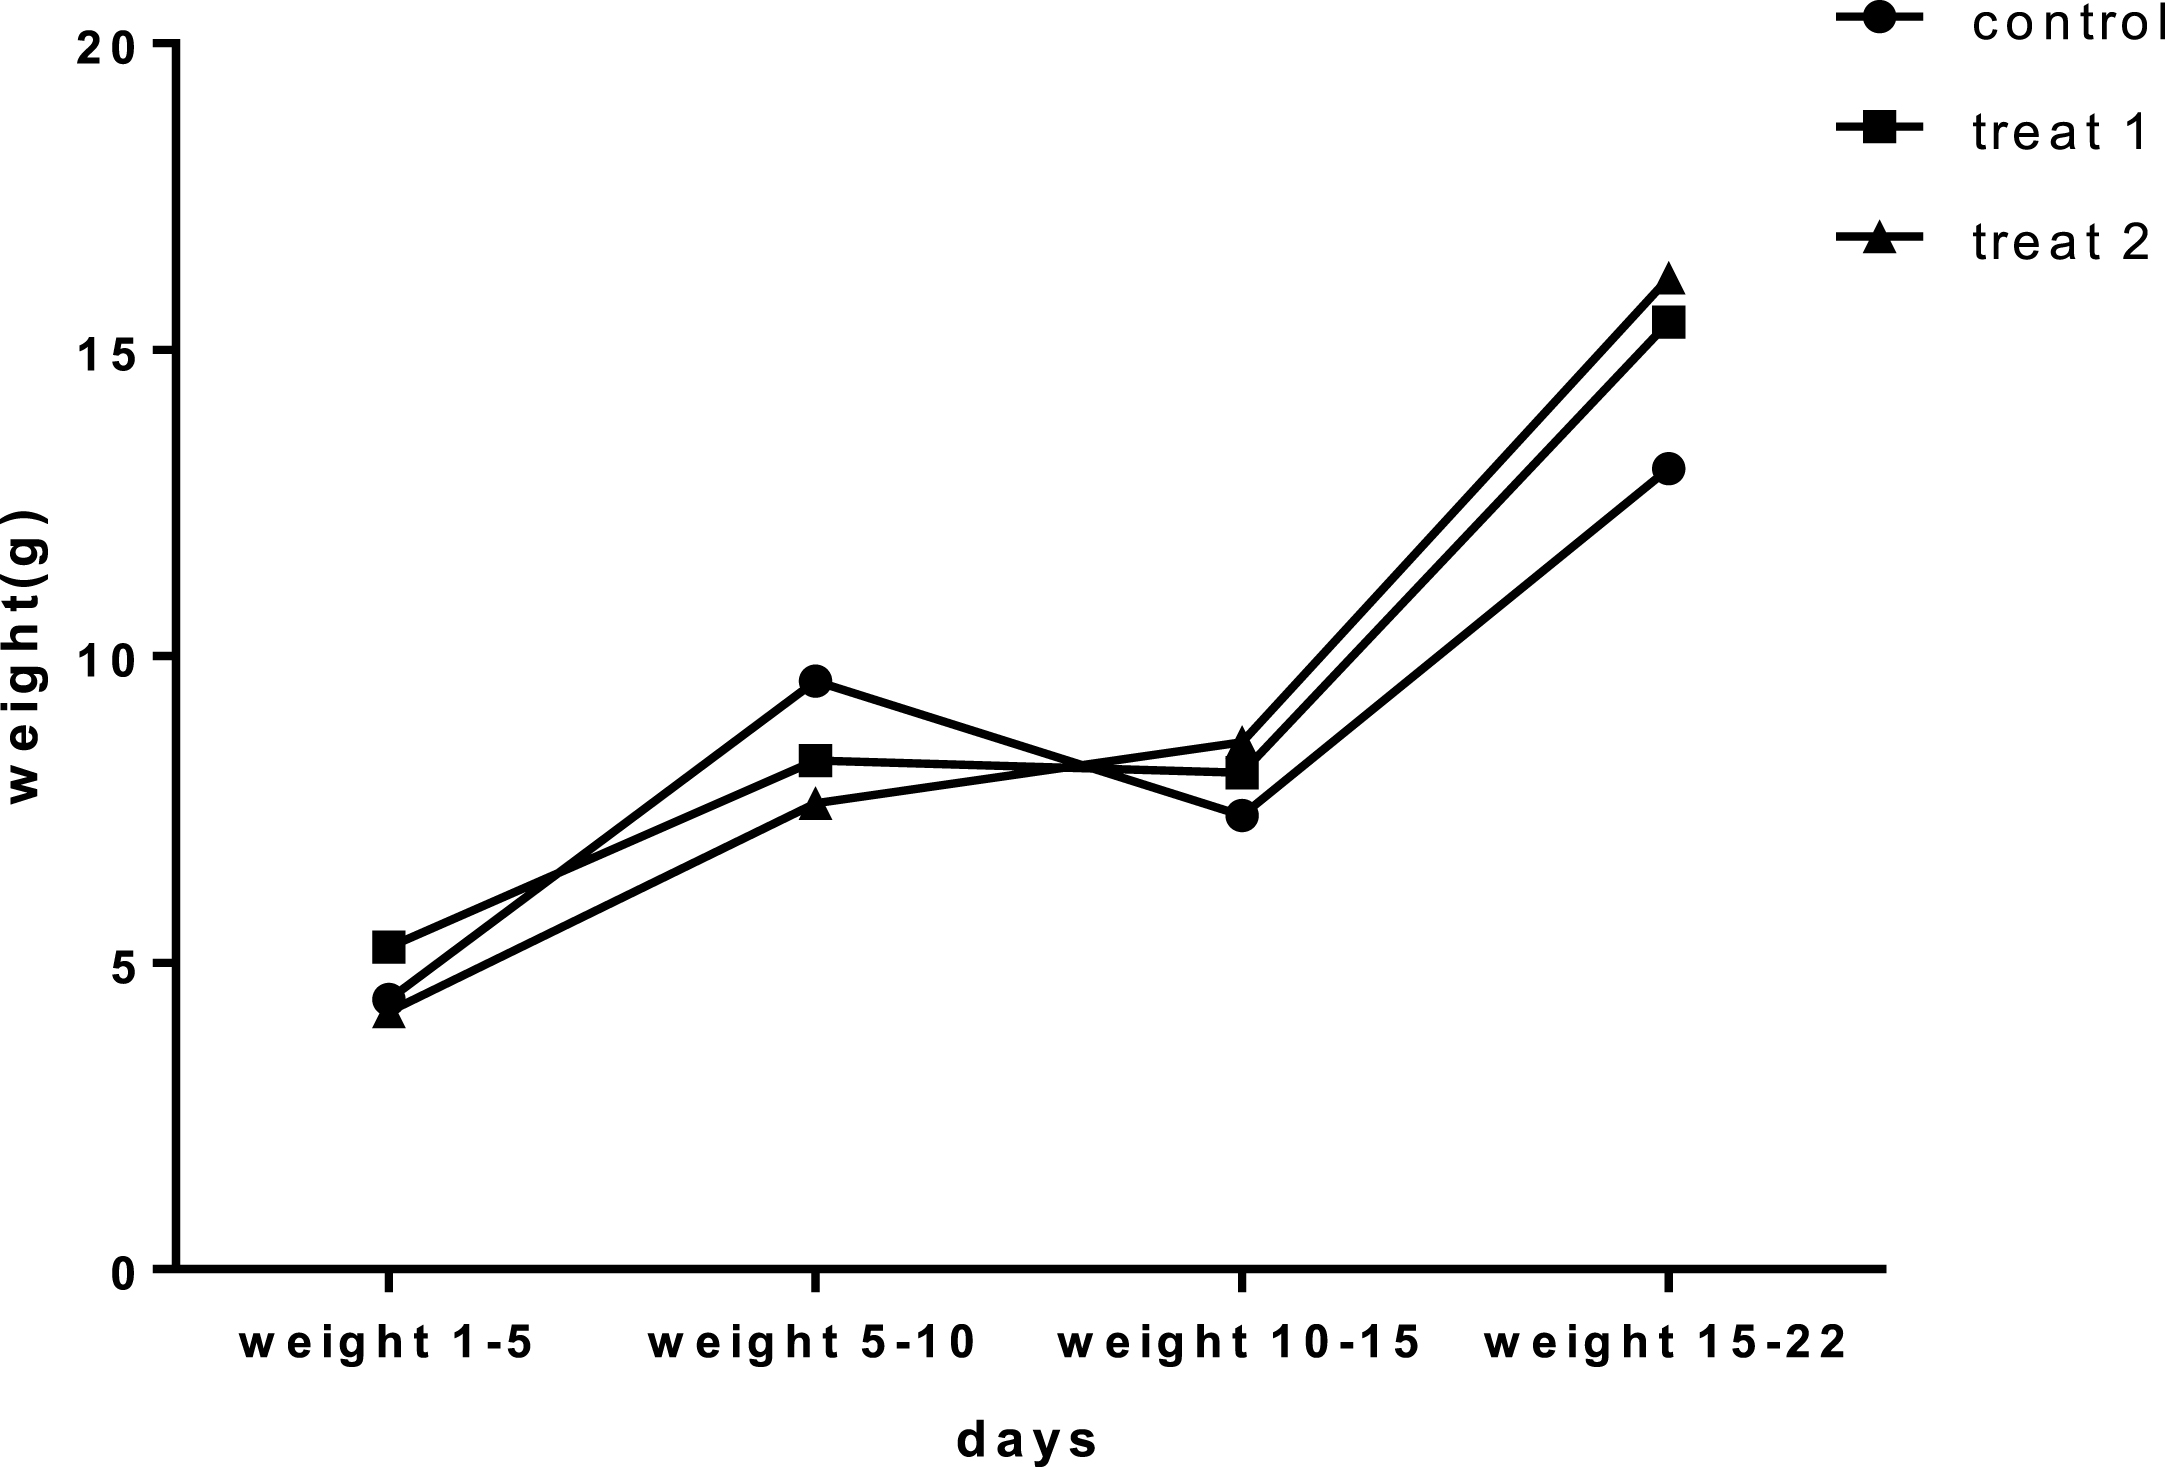 Comparison of the average weight gain in the three groups during the breastfeeding period.